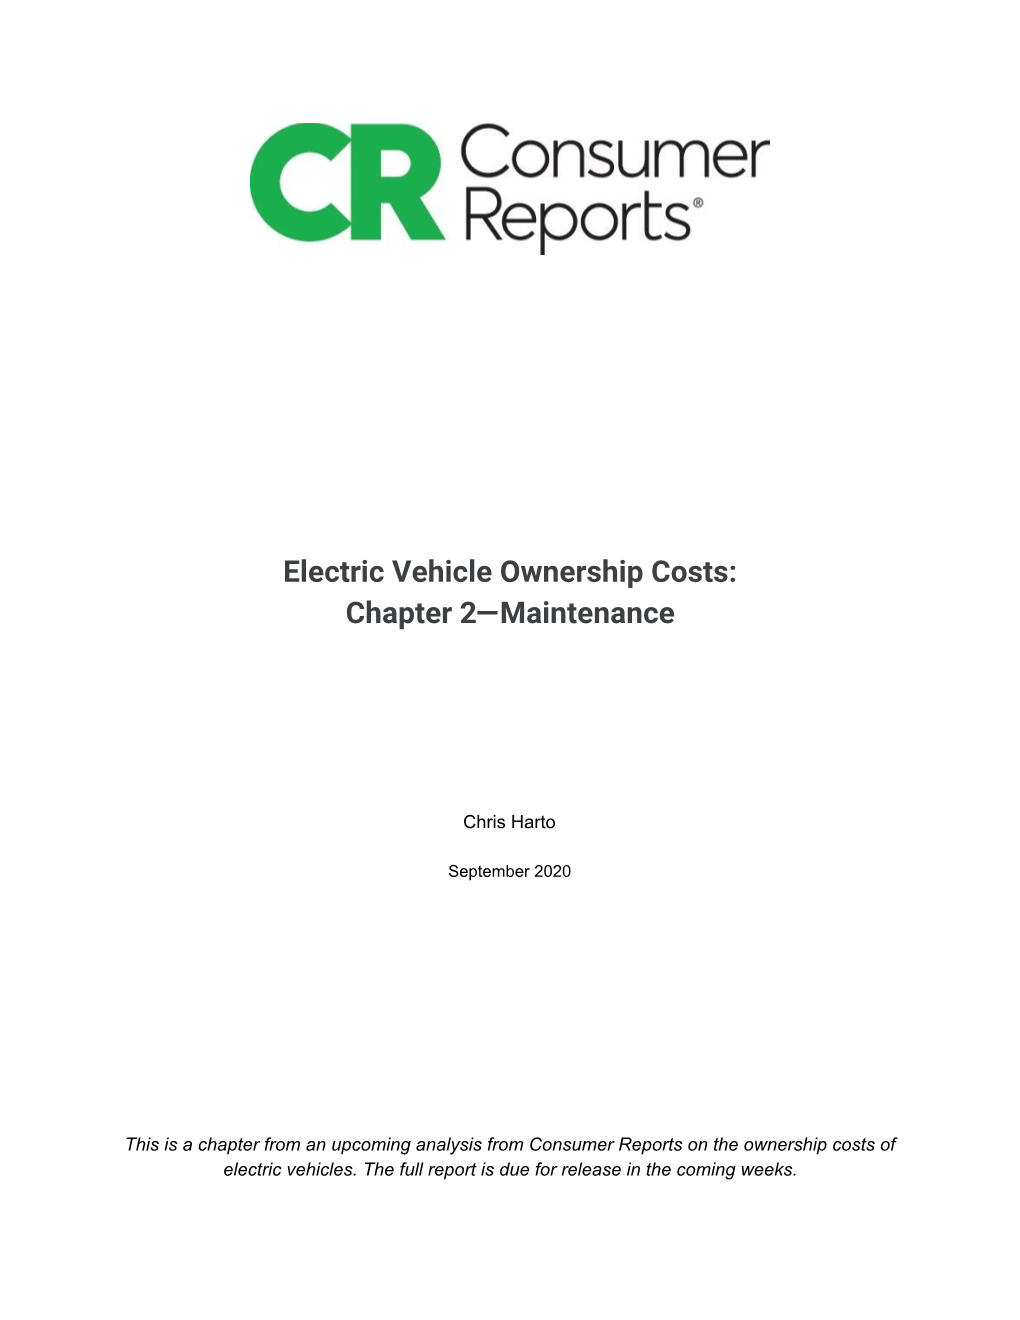 Electric Vehicle Ownership Costs: Chapter 2—Maintenance